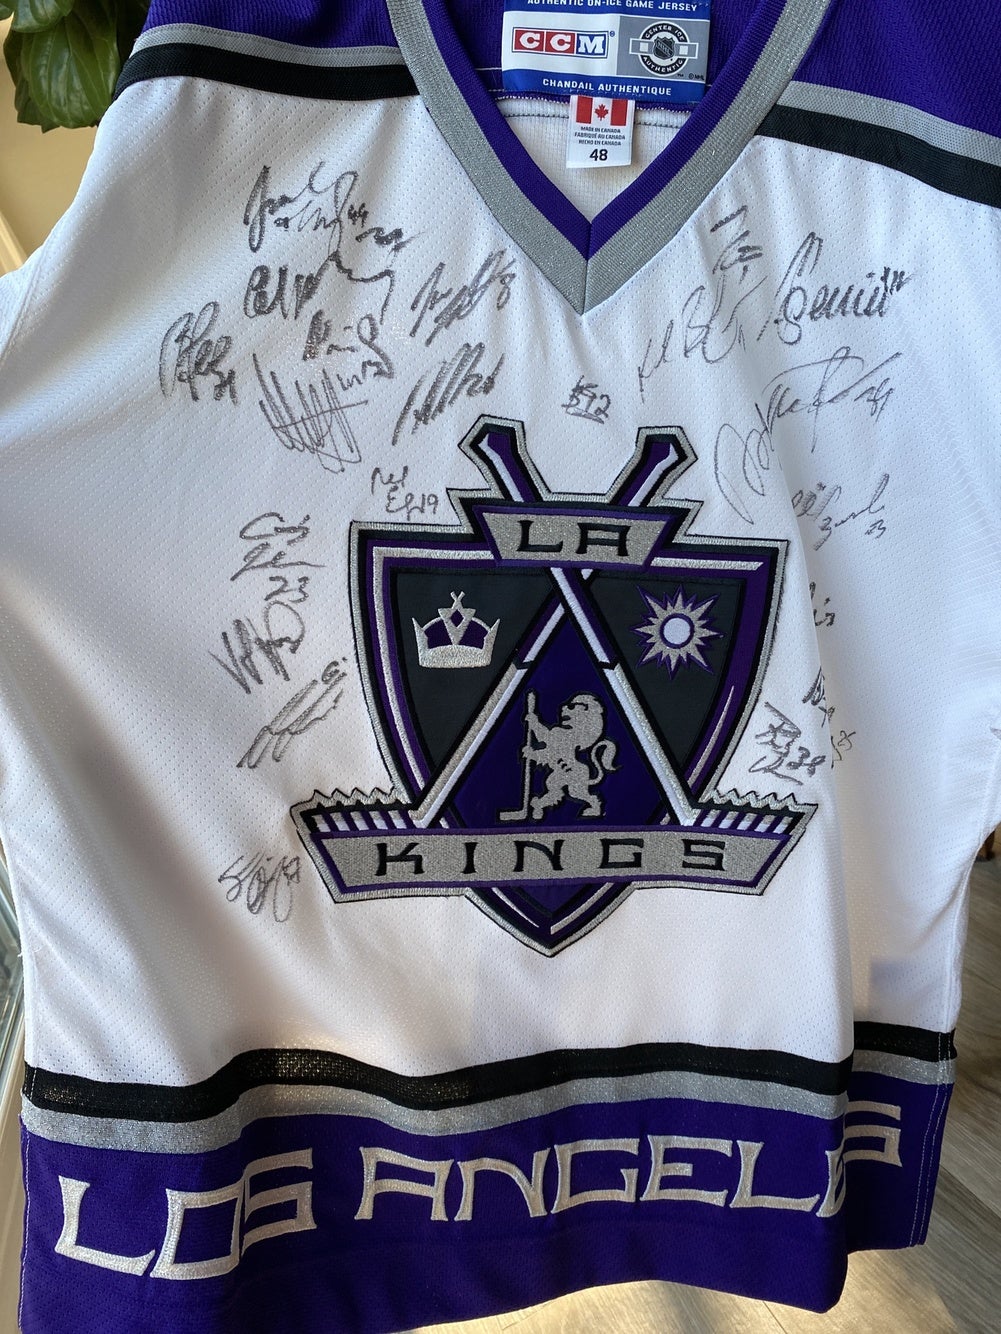 Los Angeles Kings Signed Jerseys, Collectible Kings Jerseys